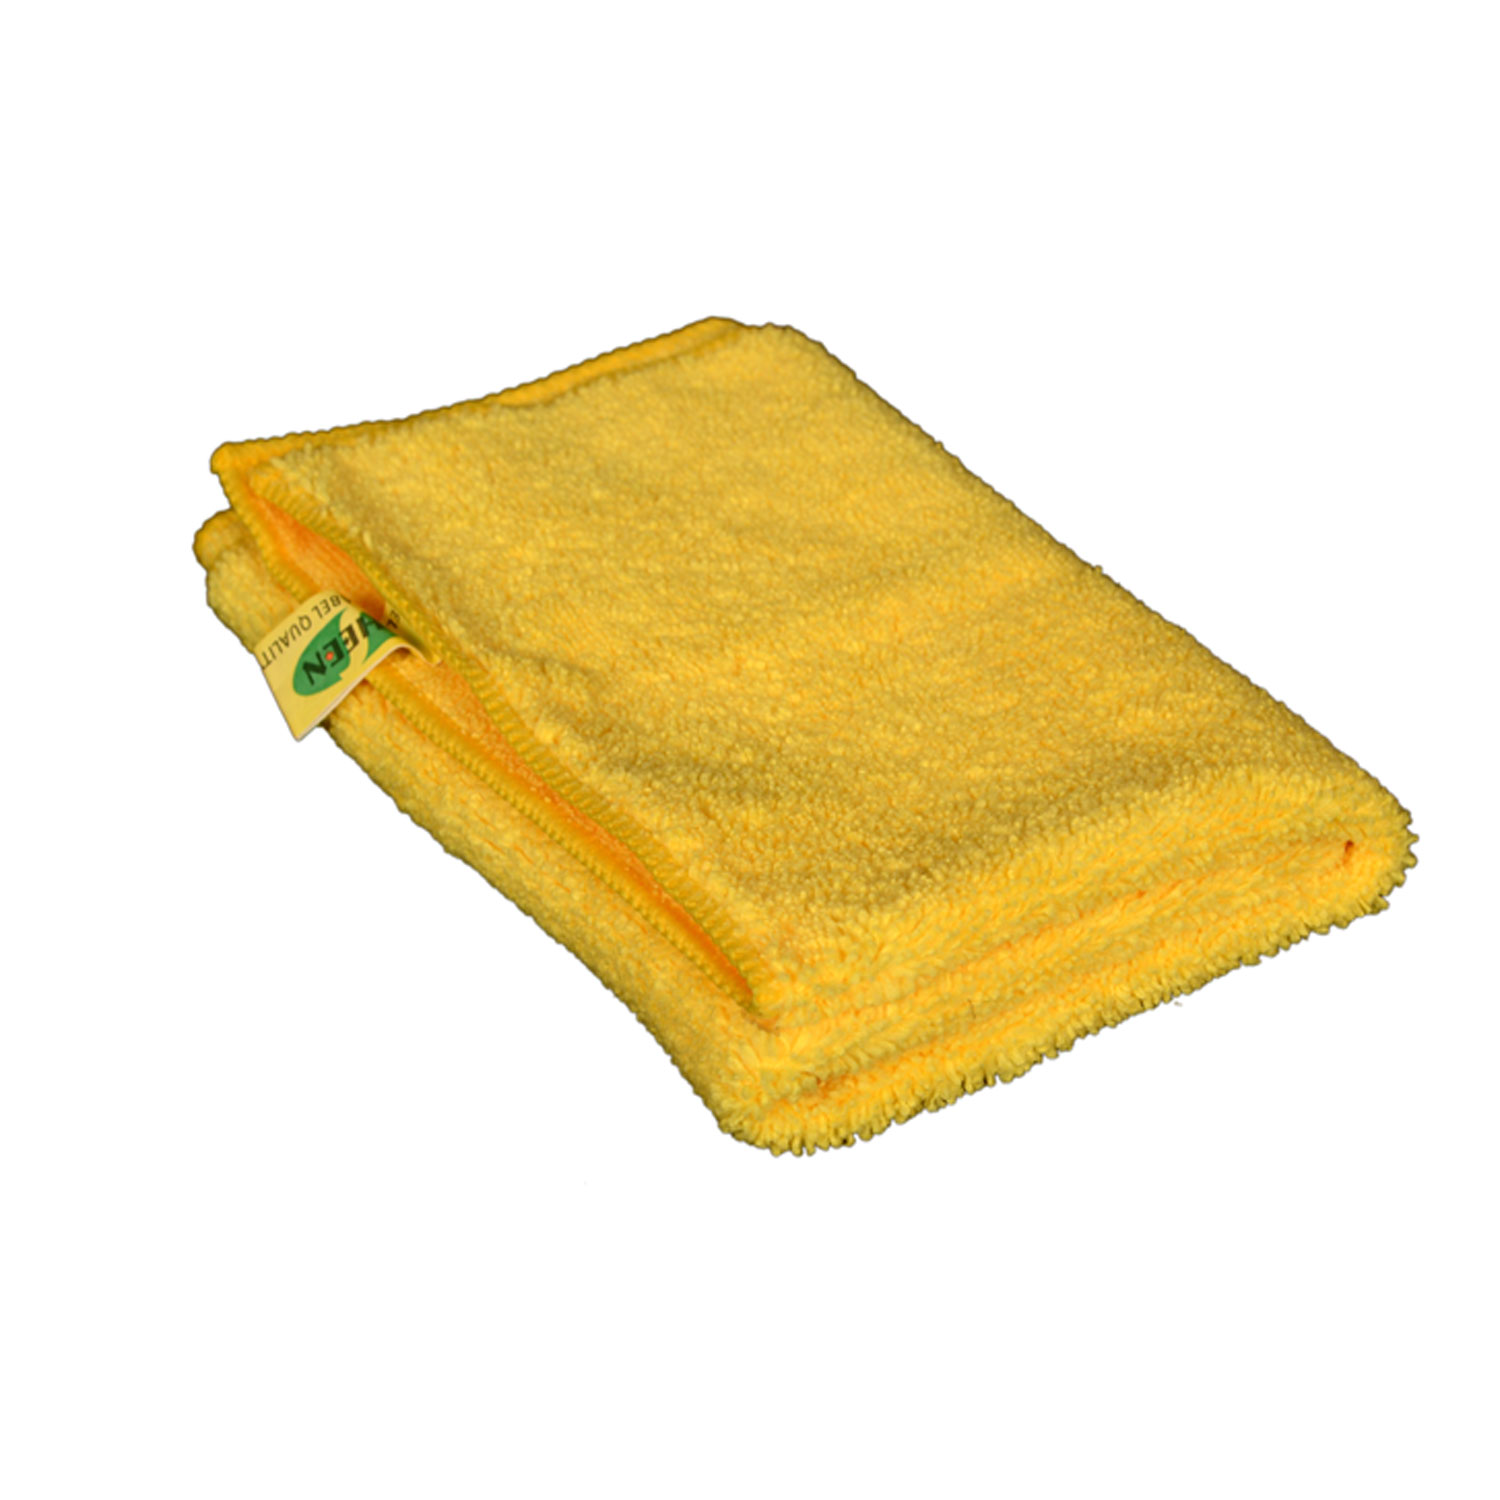 Sheen Microfiber cleaning cloth | Home cleaning cloth |35X35 CM | 300 GSM | PACK OF 1 | 